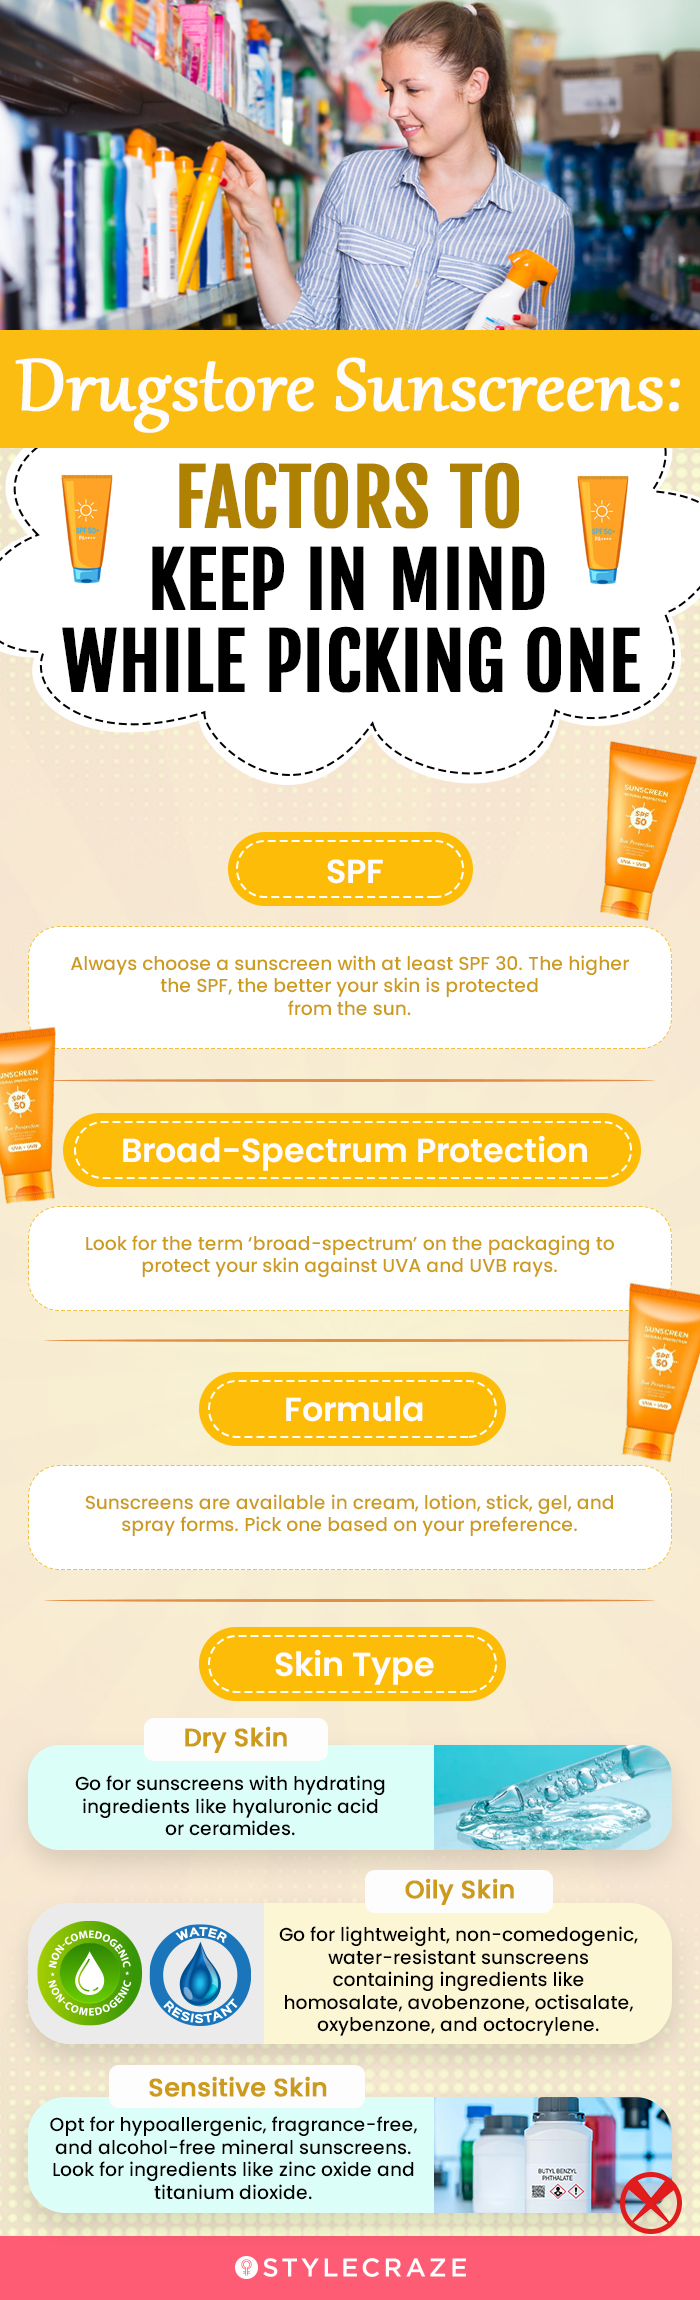 Drugstore Sunscreens: Factors To Keep In Mind While Picking One (infographic)